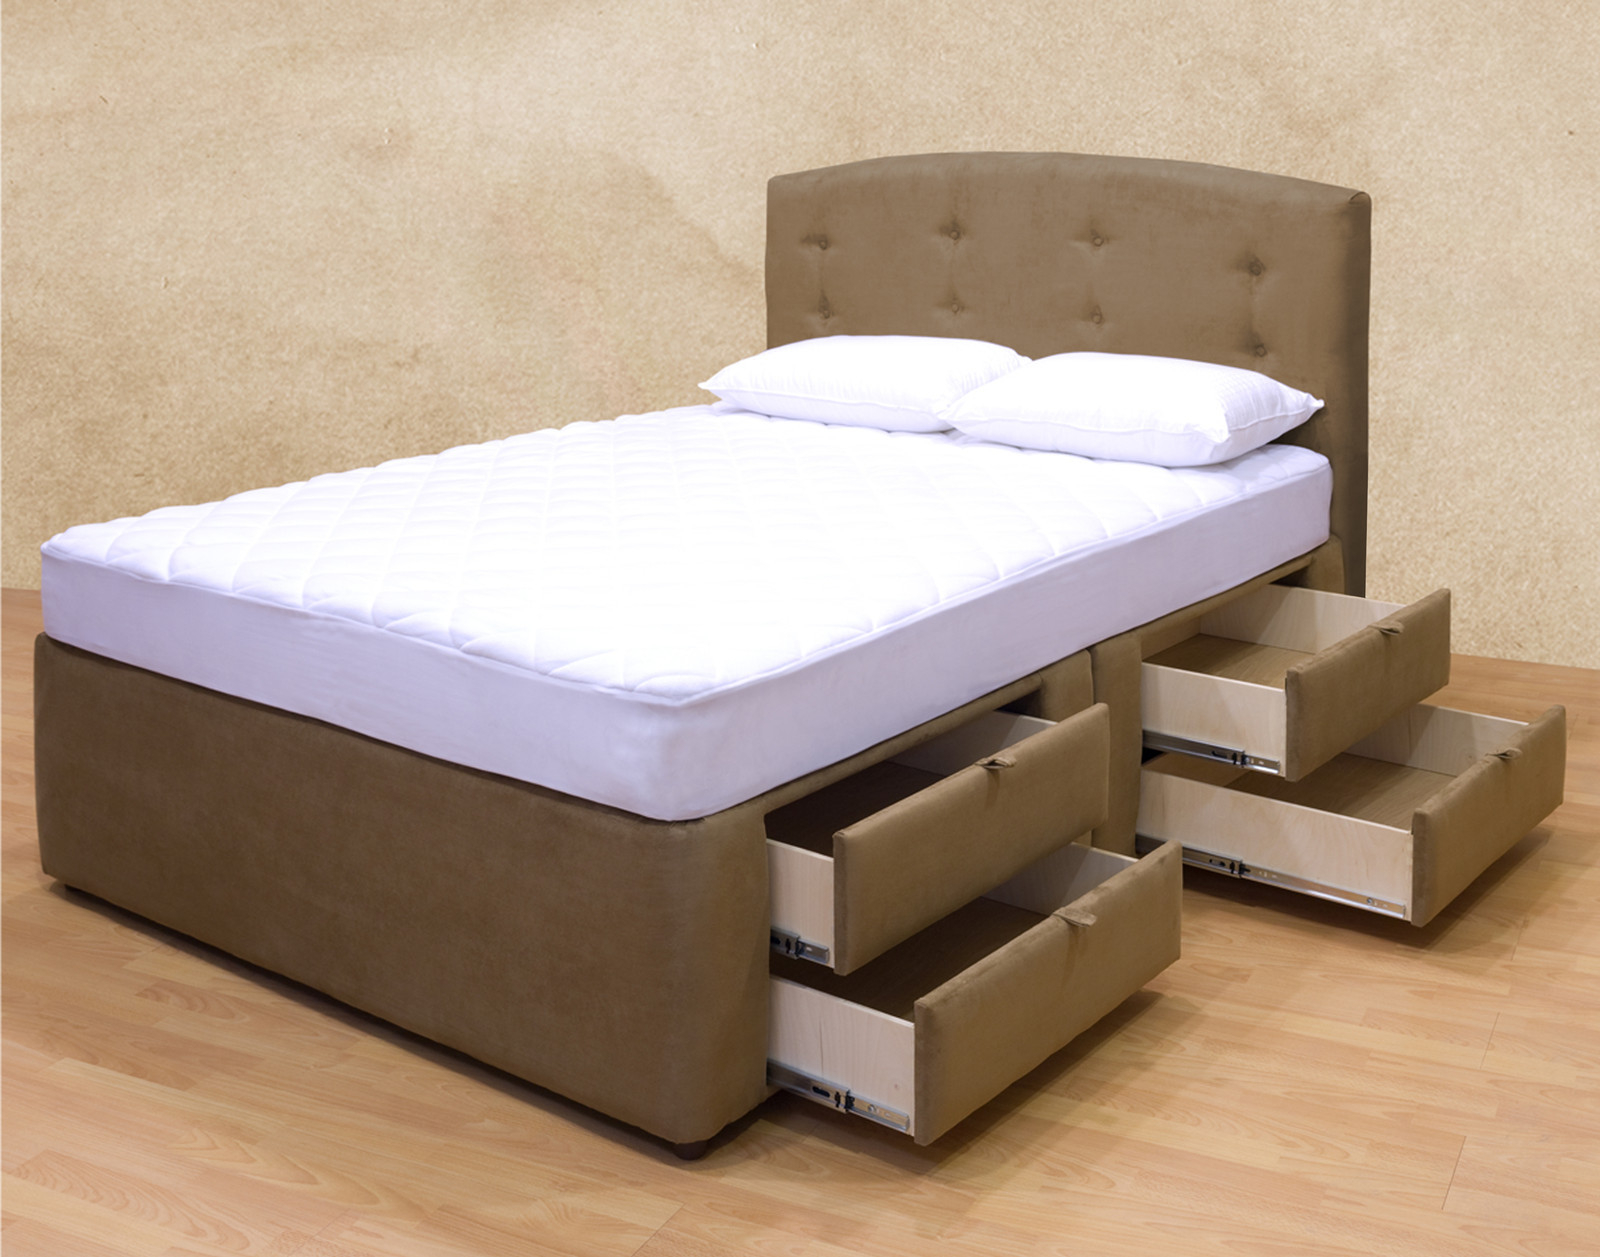 Bed With Drawers Underneath Visualhunt, King Bed Frame With Underbed Storage